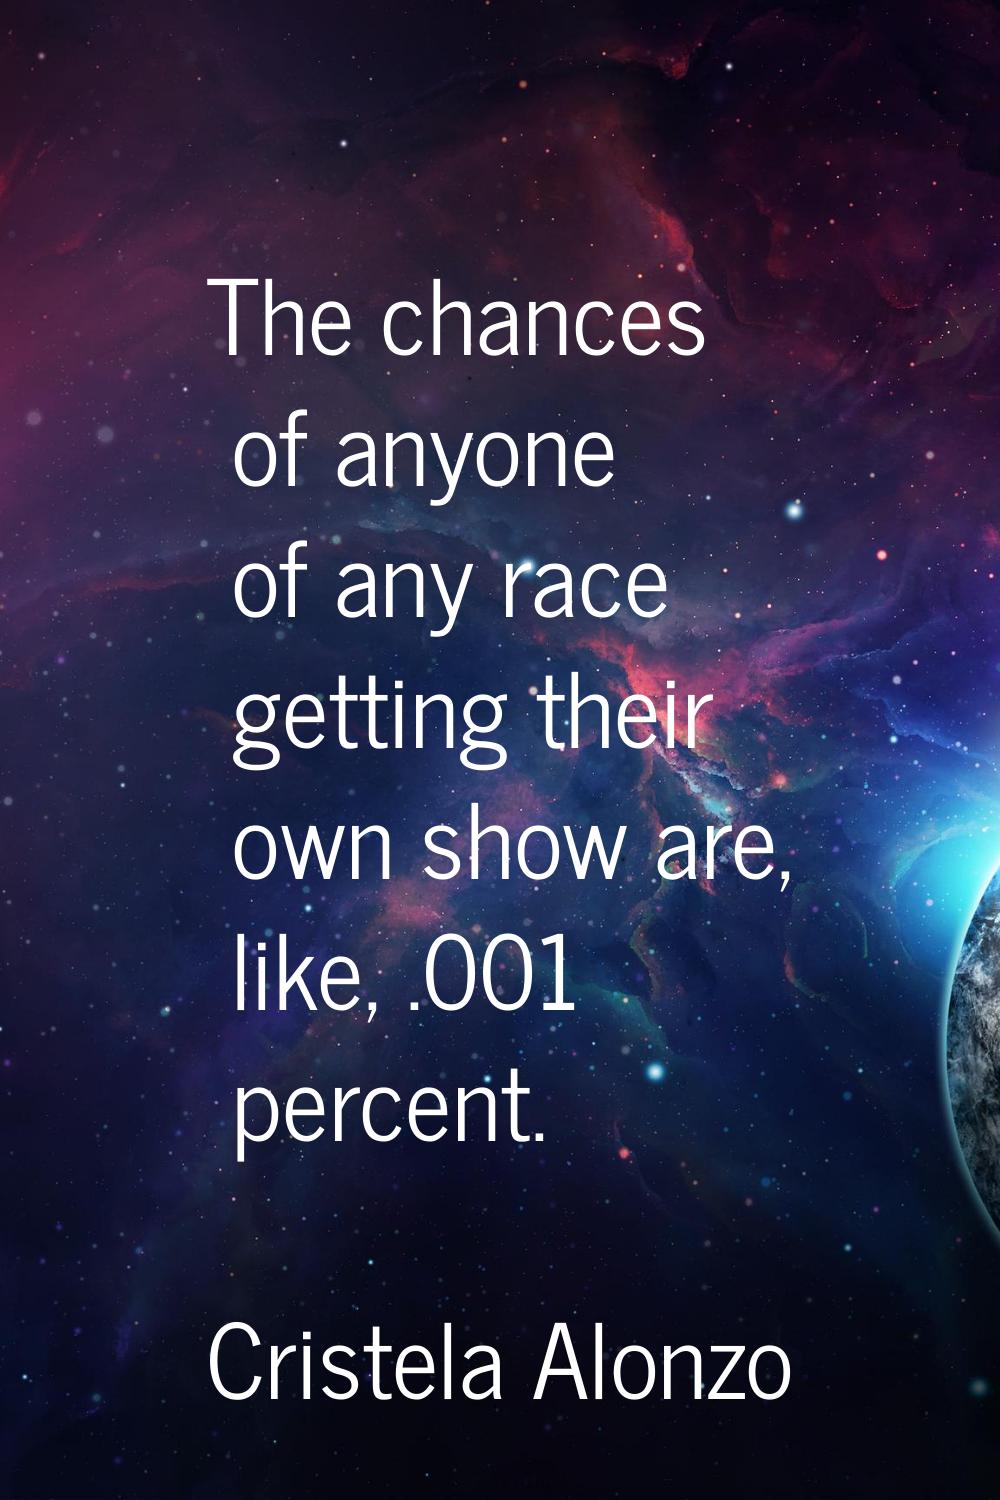 The chances of anyone of any race getting their own show are, like, .001 percent.